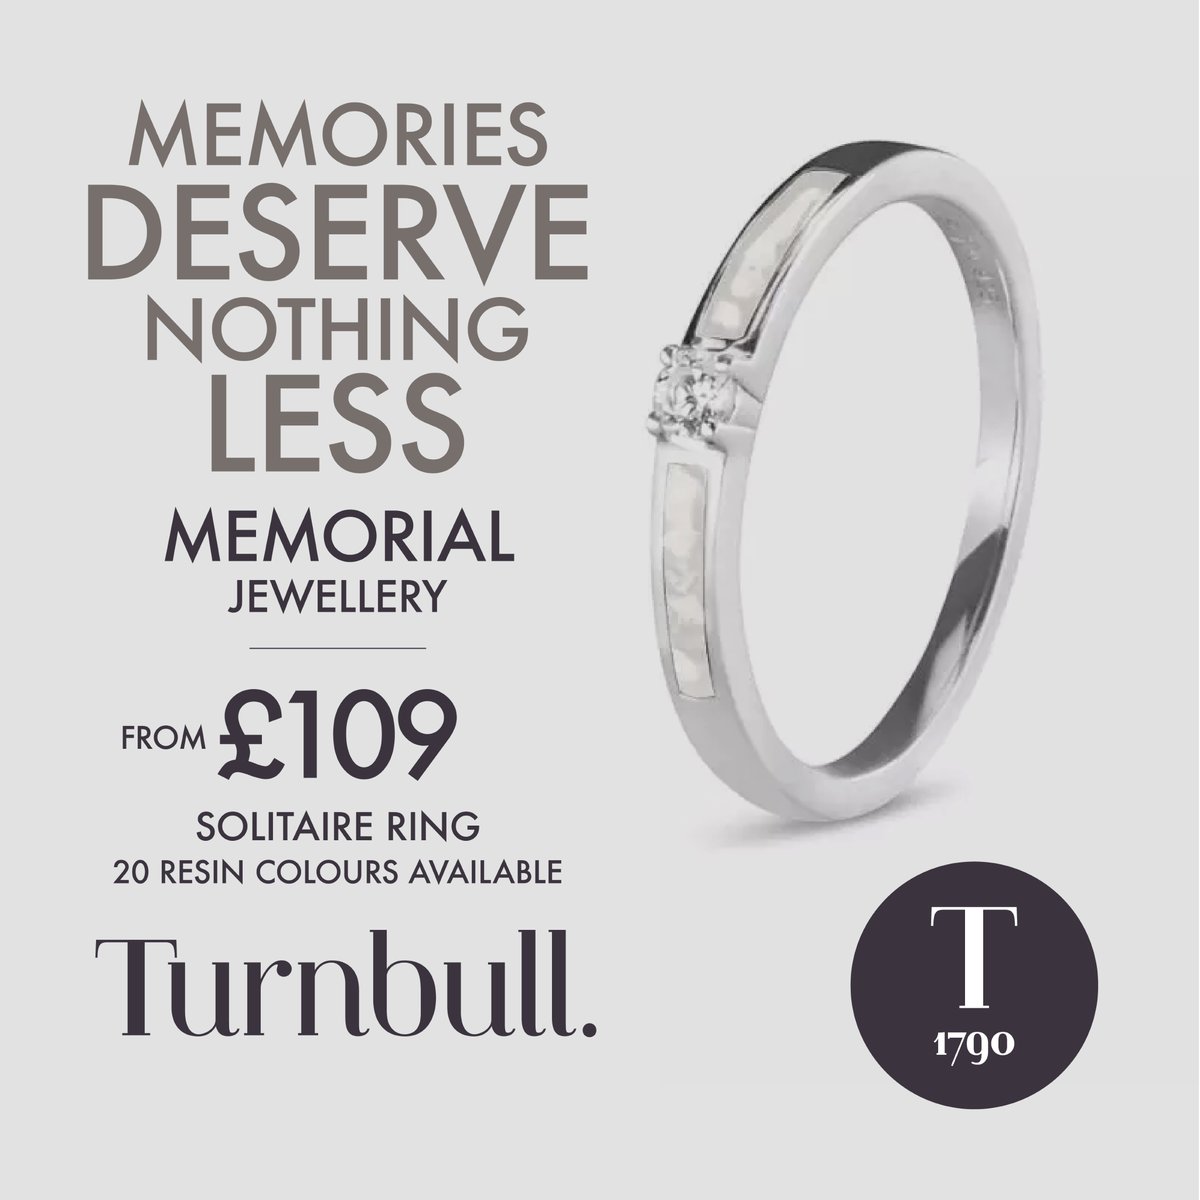 #MemorialJewellery - Look at this #Solitaire #Ring. We offer a unique way to remember your #lovedones. We turn ashes into #jewellery. Call in to see the collection, or message us to find out more.
-
Turnbull.
Serving our community since 1790
-
Visit - bit.ly/3BO6ag9